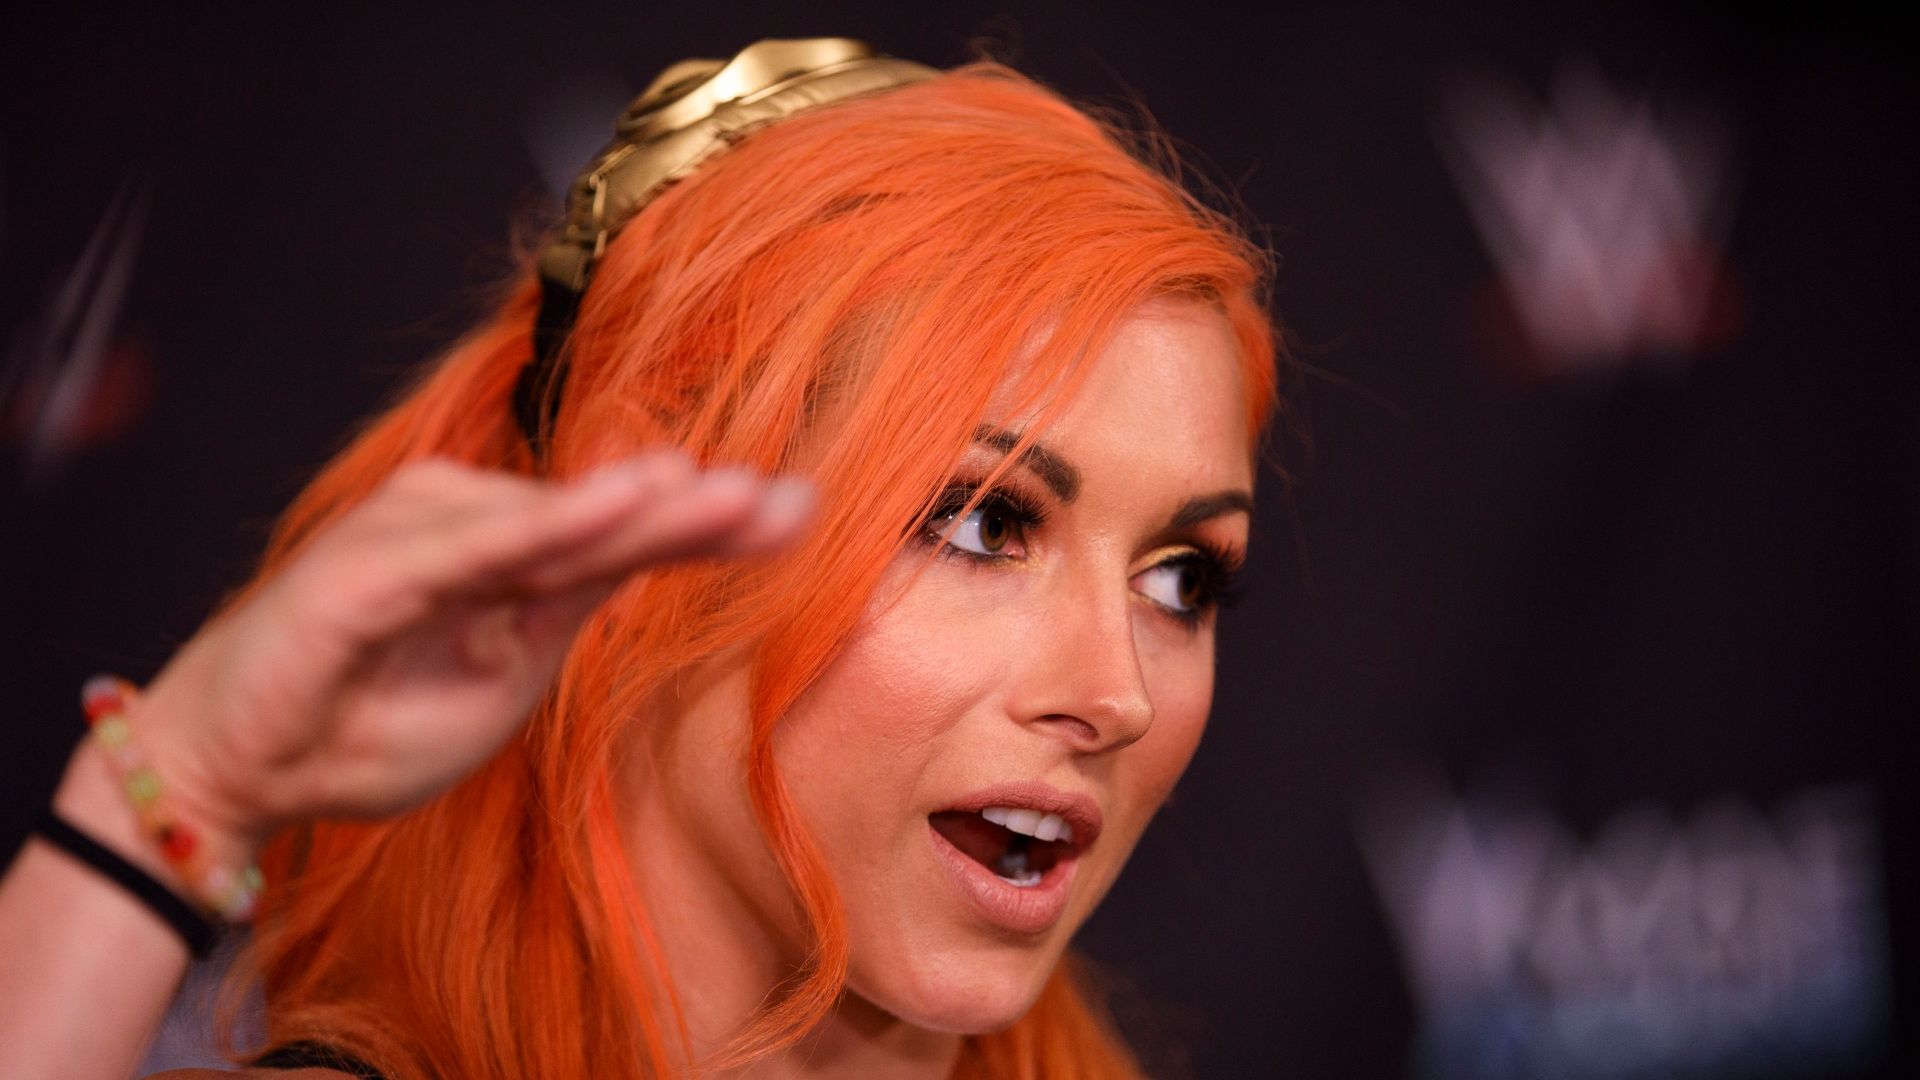 WWE star Becky Lynch joins Ariel Helwani to share how fans appreciate that ...